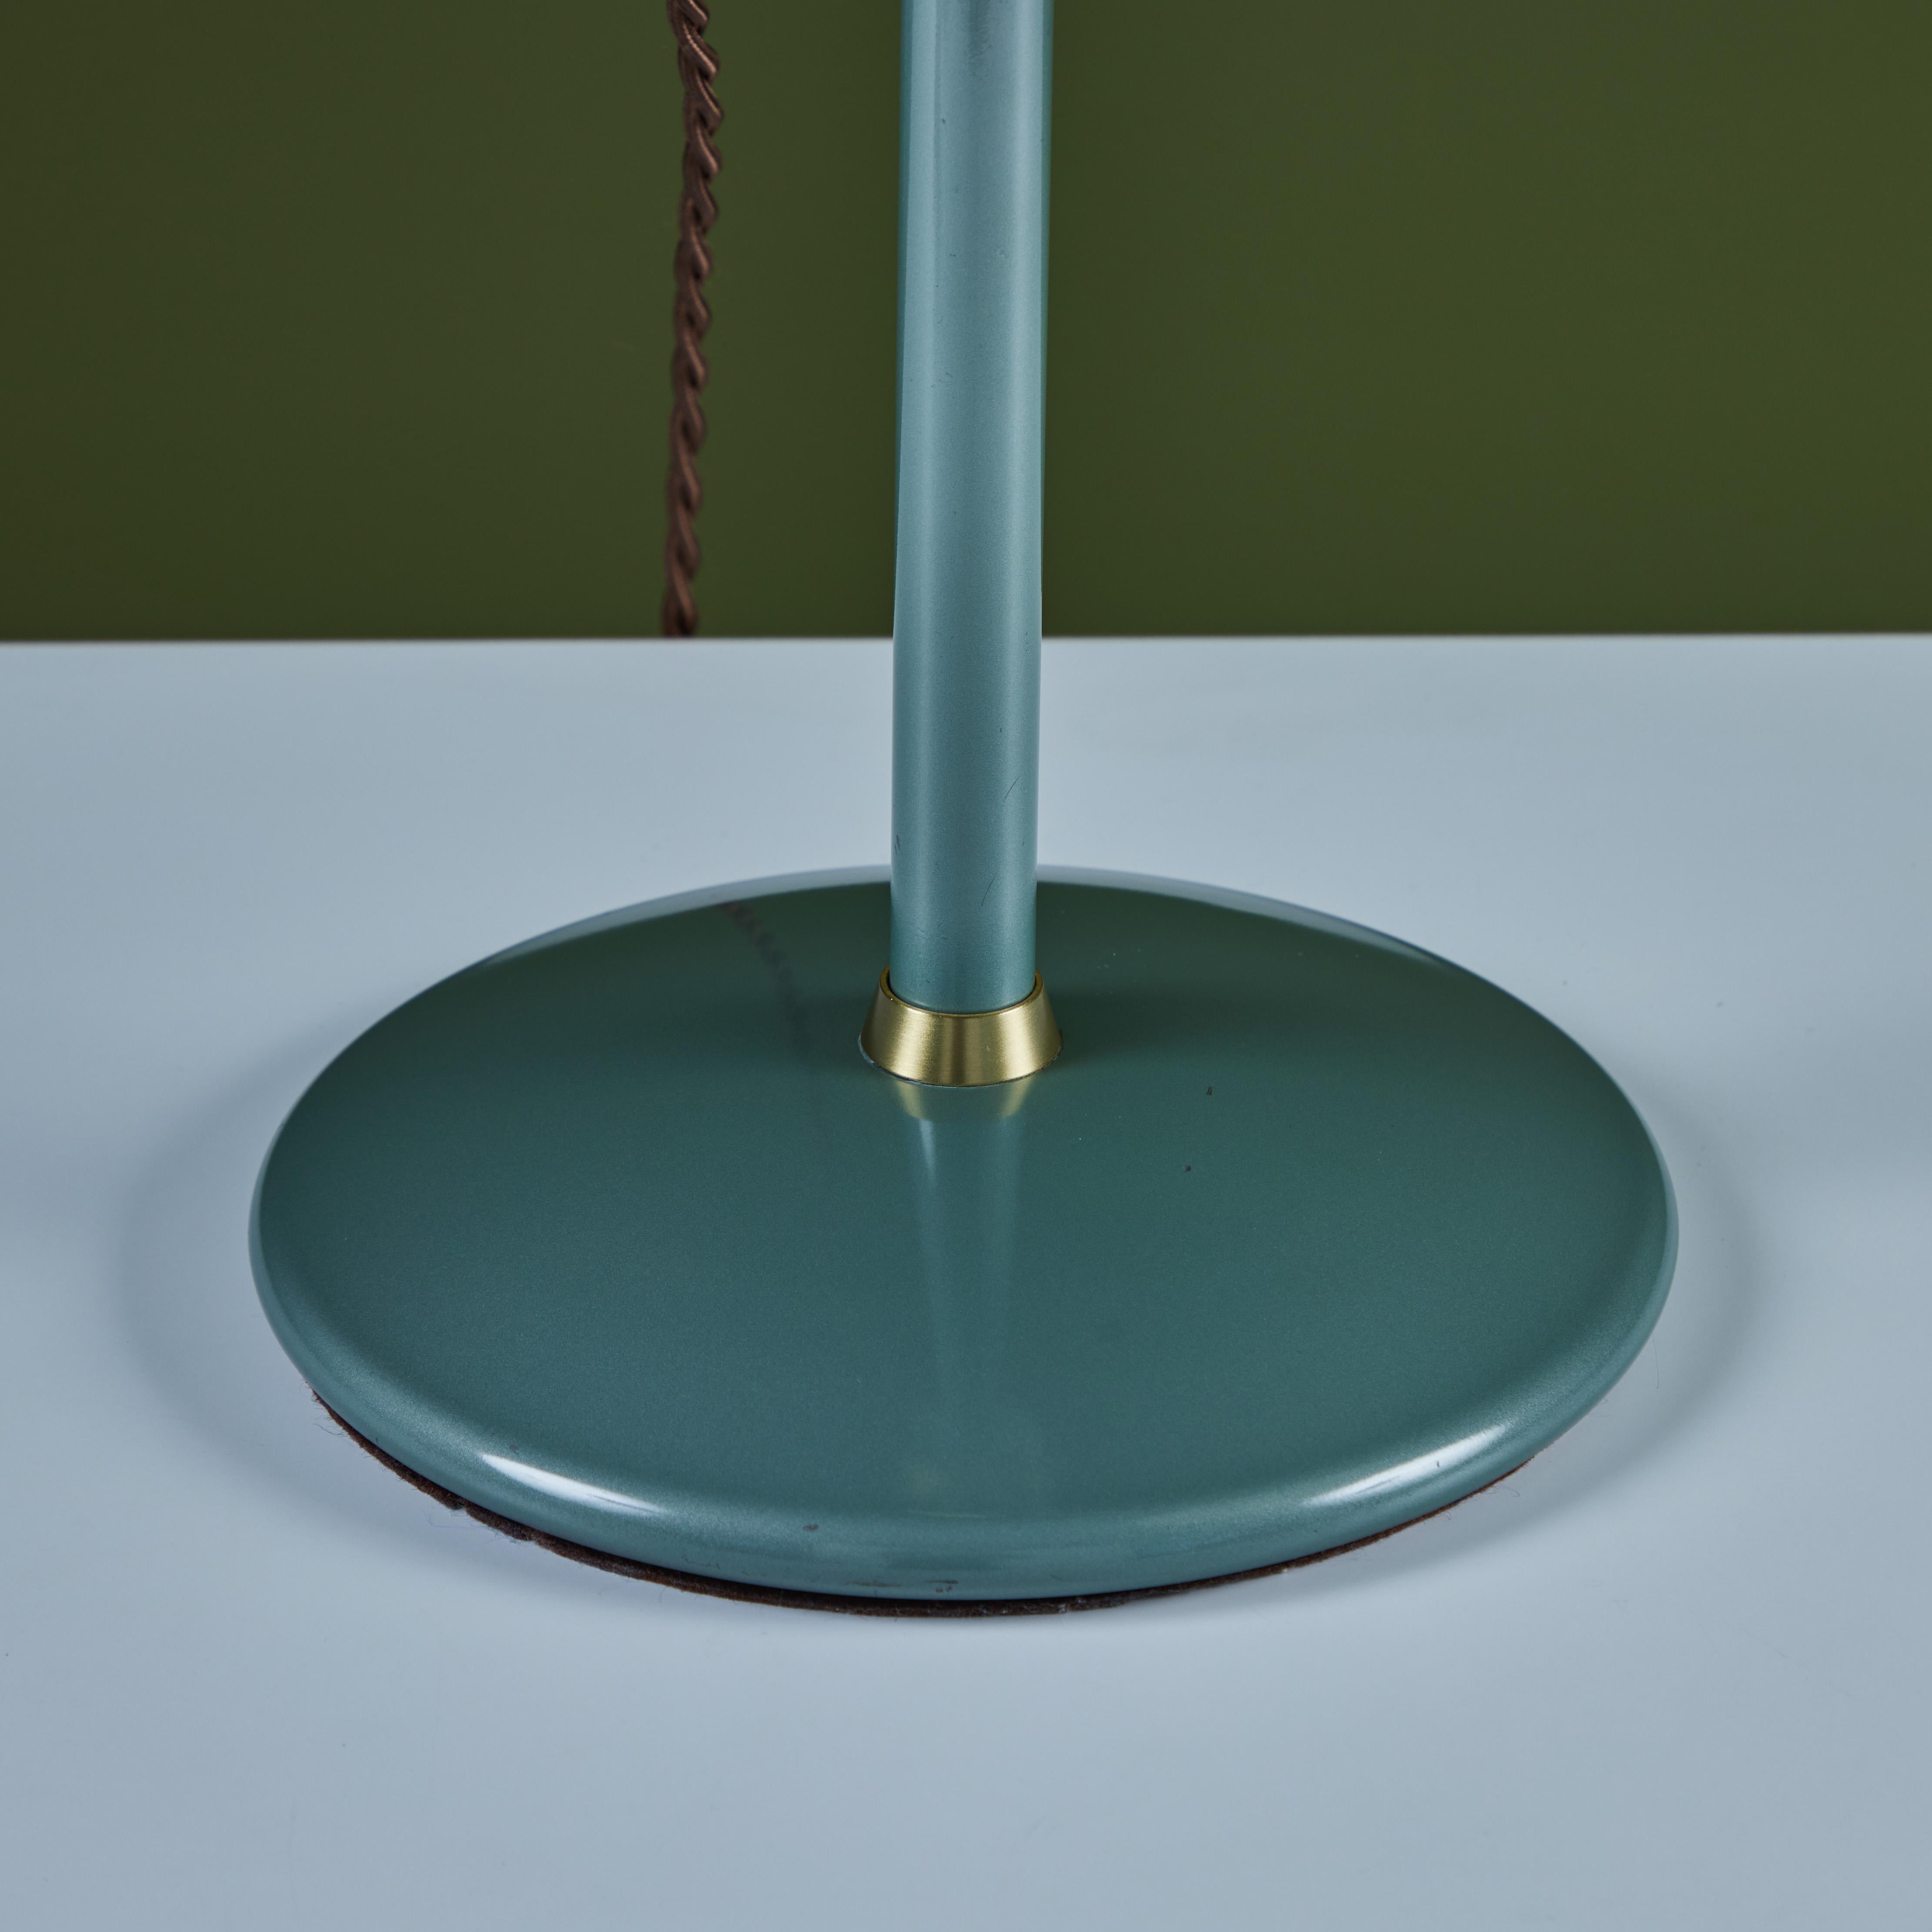 Dazor Green Enamel Desk Lamp with Brass Accents 5